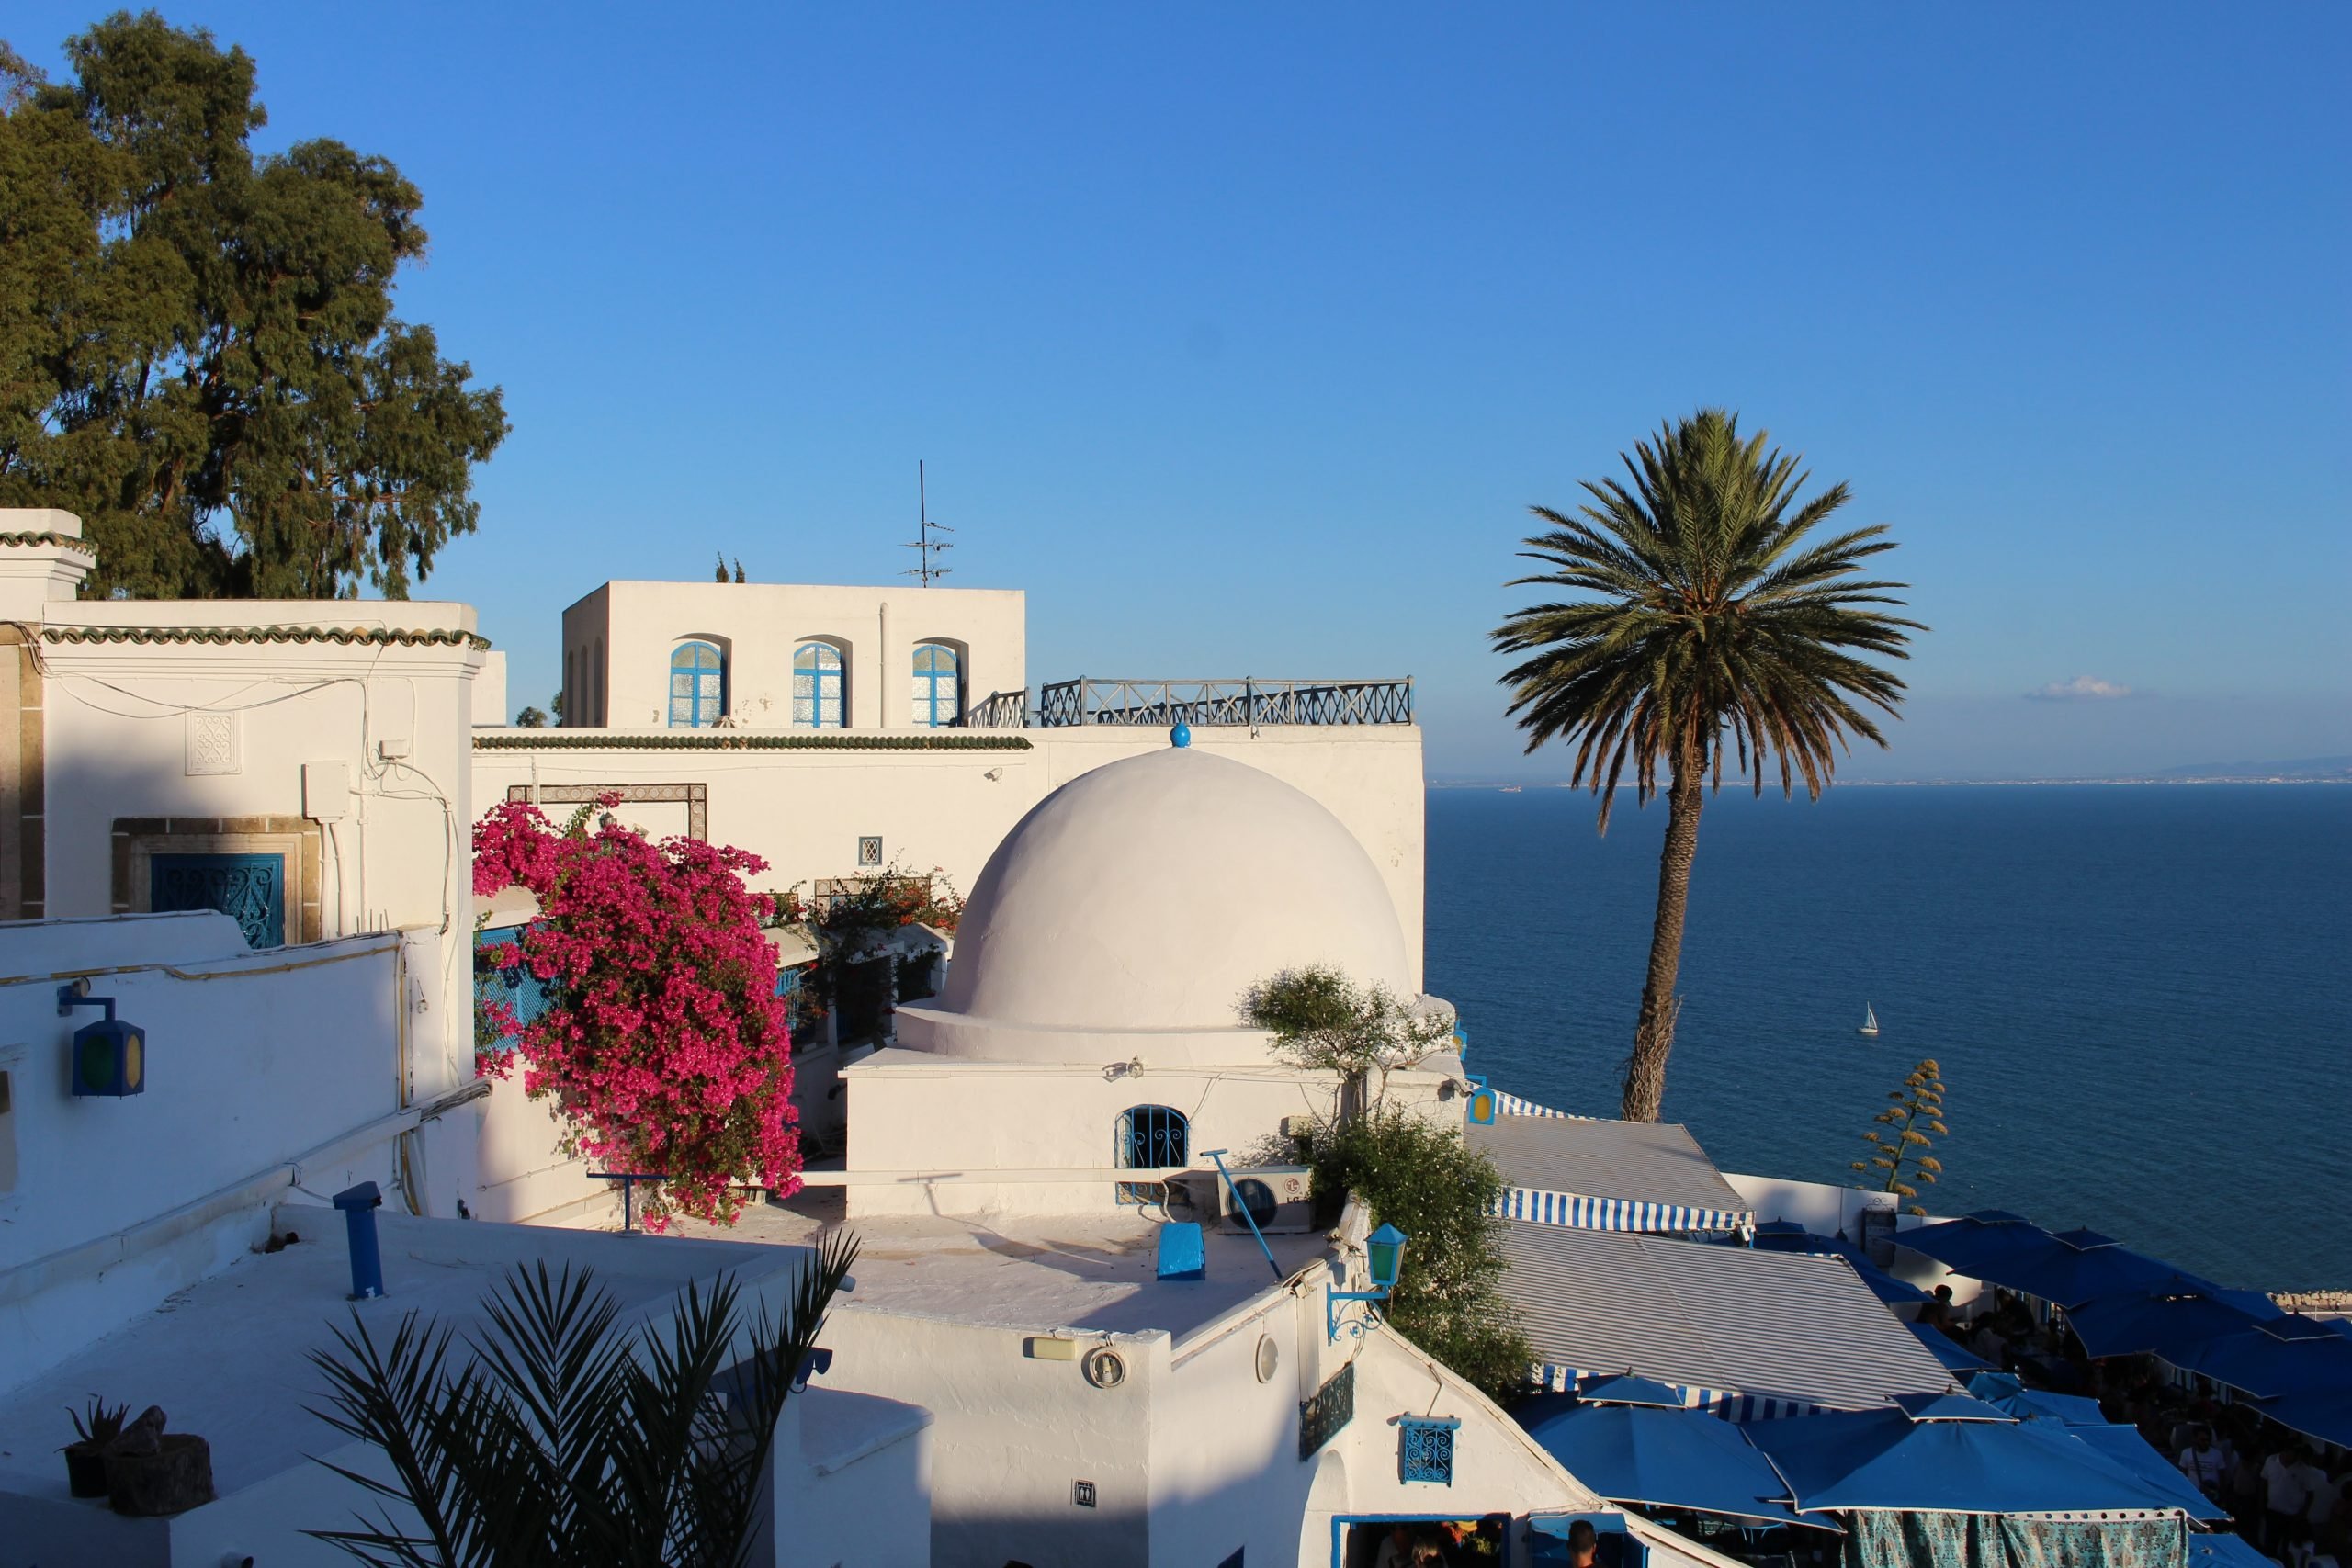 Sidi Bou Saïd, Site archéologique de Carthage, Tunisie, What To Wear In Tunisia, Tunisia Packing List, What To Pack For Tunisia